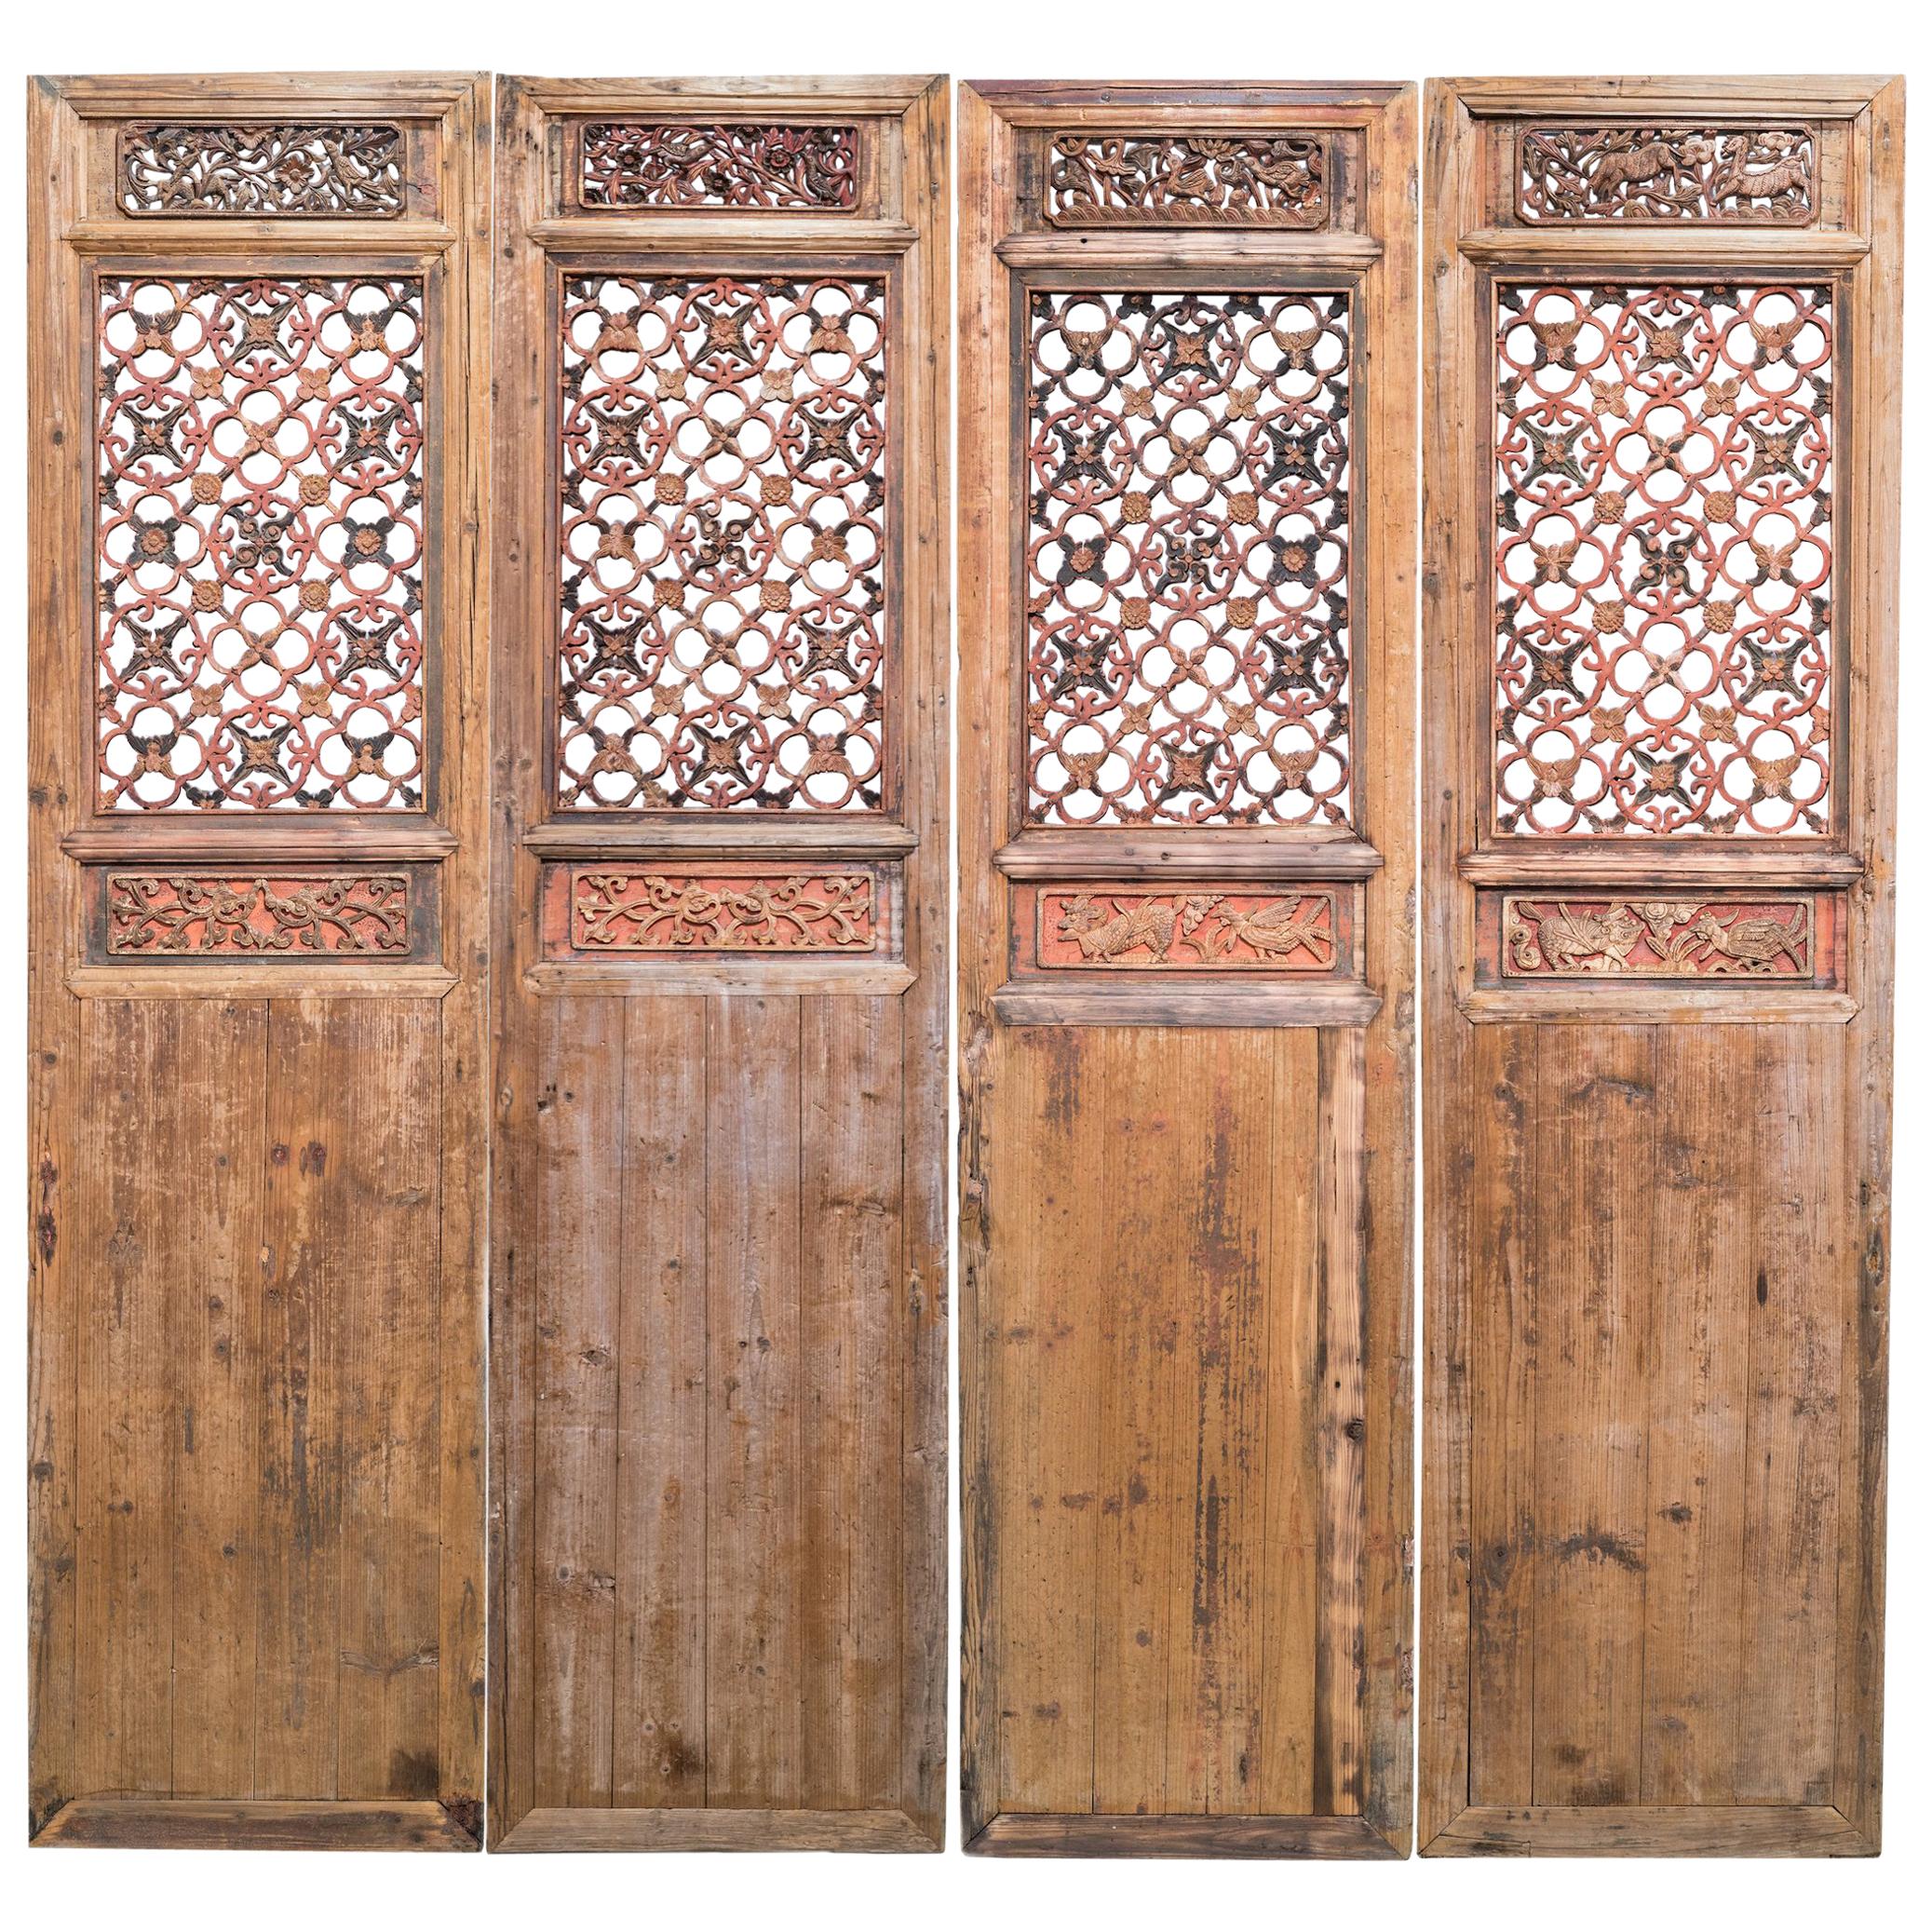 Late 19th Century Door Panels with Latticework and Carvings